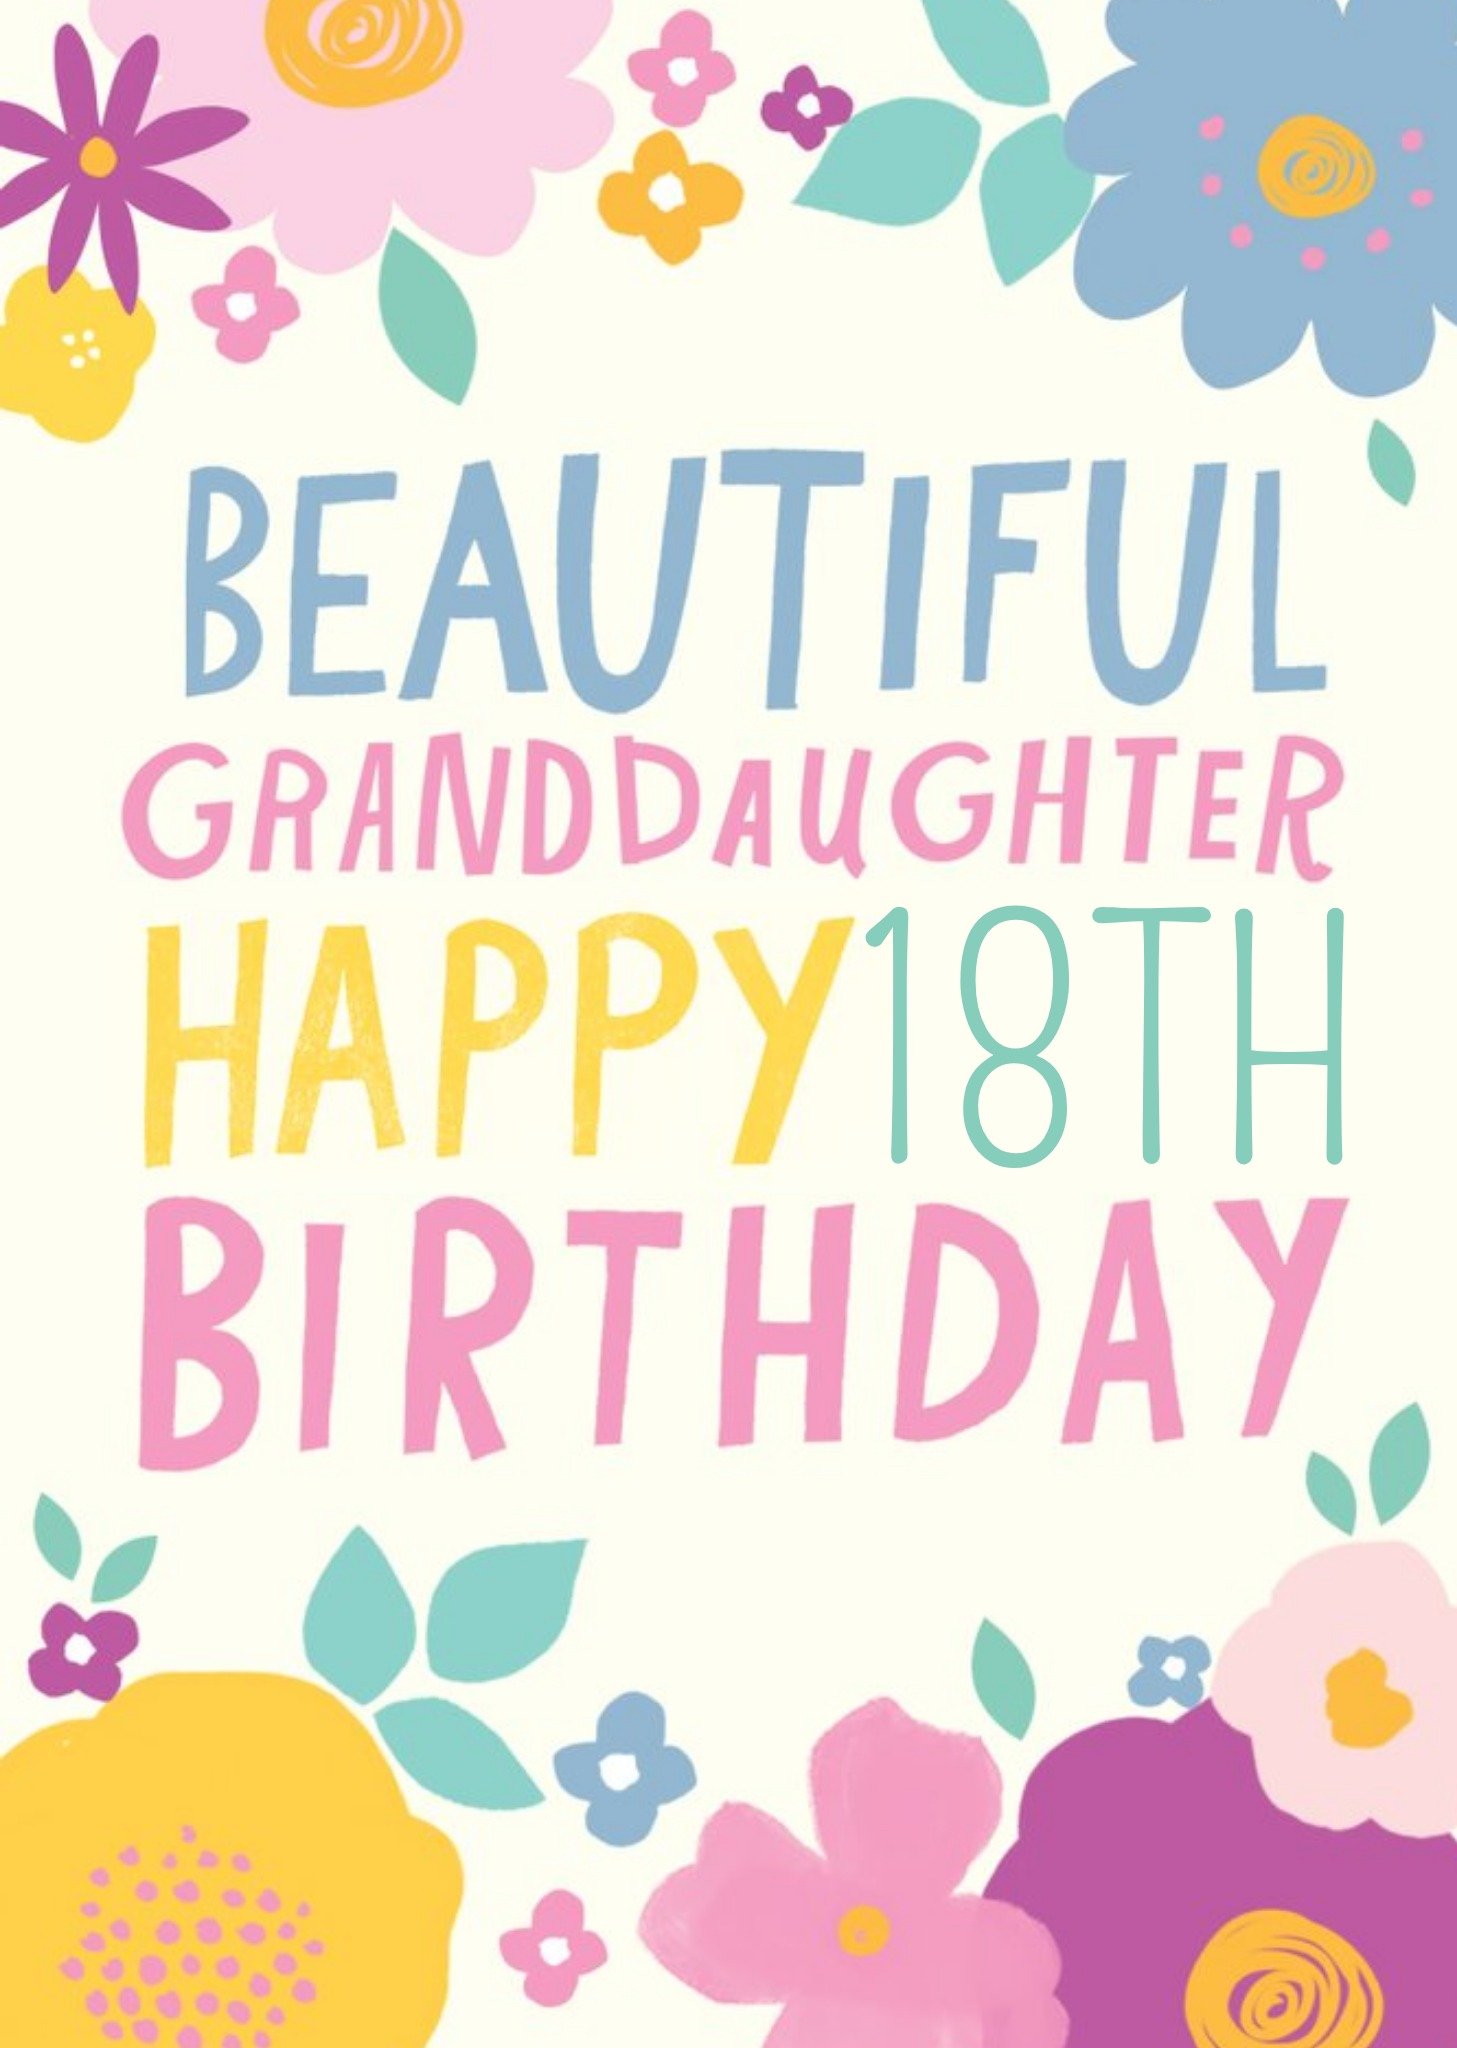 Moonpig Pigment - Bright Bold Floral Typographic Happy 18th Birthday Granddaughter Card, Large